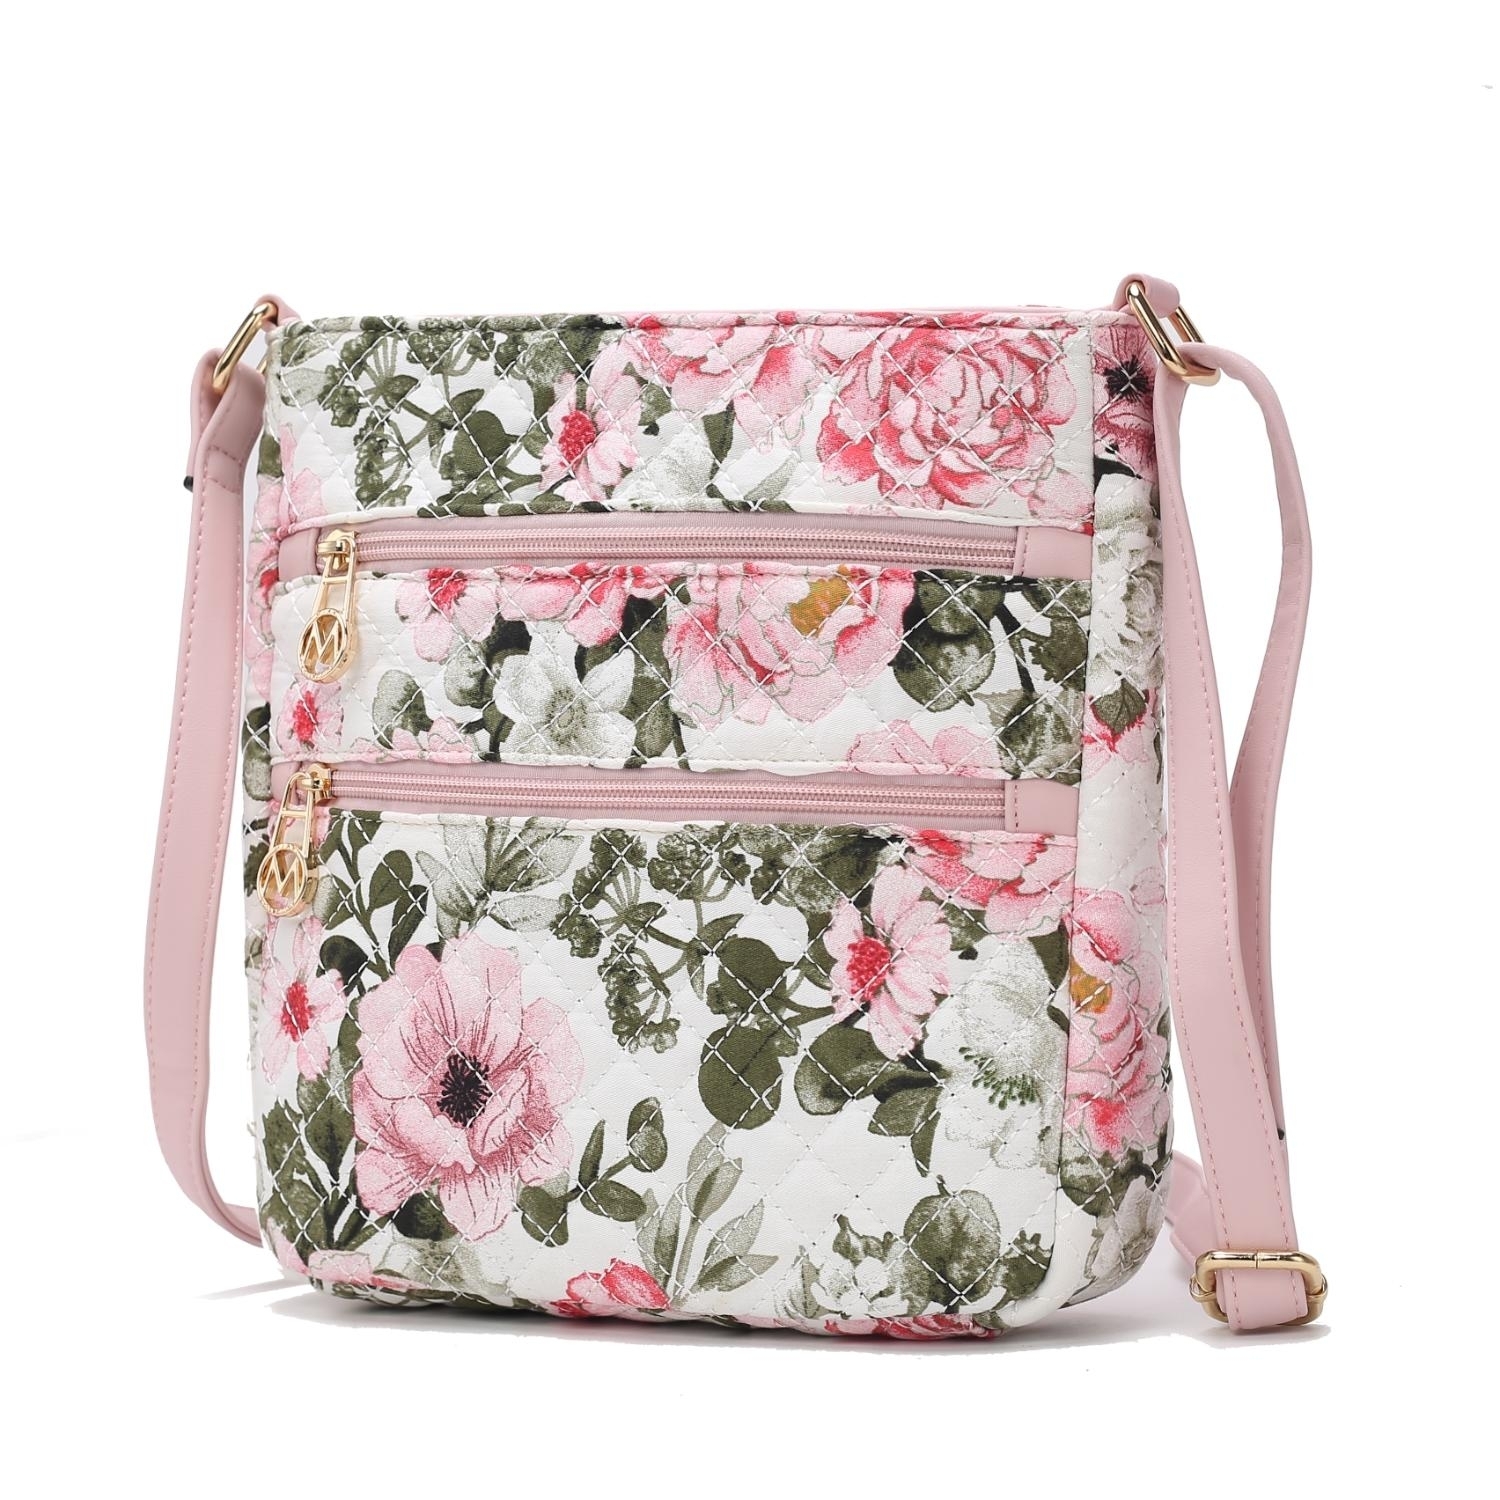 MKF Collection Lainey Quilted Cotton Botanical Pattern Women's Crossbody By Mia K - White